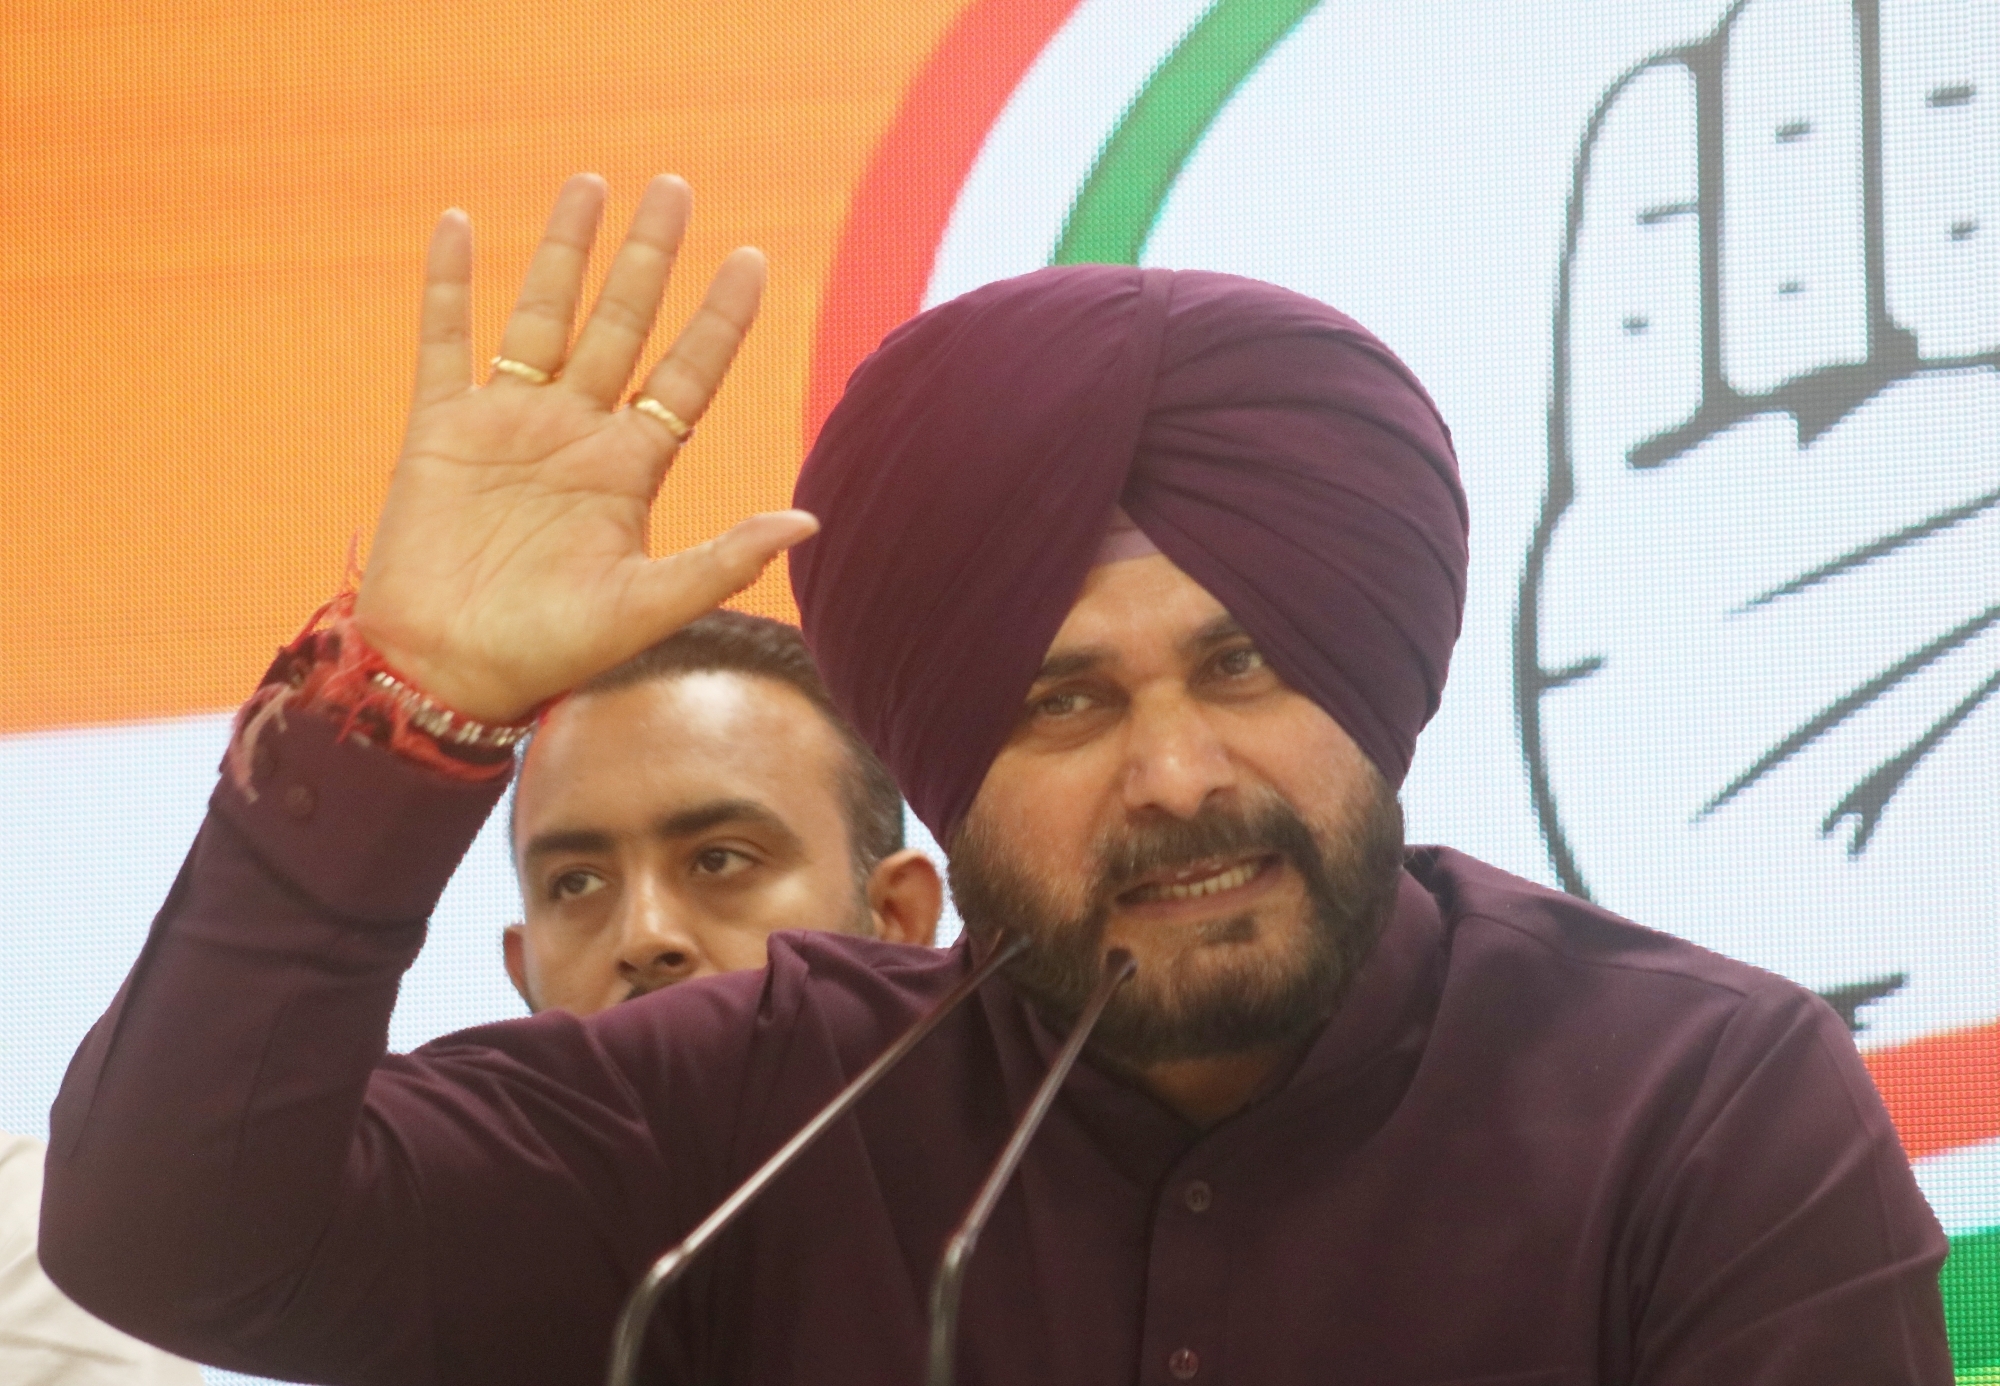 Sidhu publicly apologized for wearing shawl bearing a religious symbol